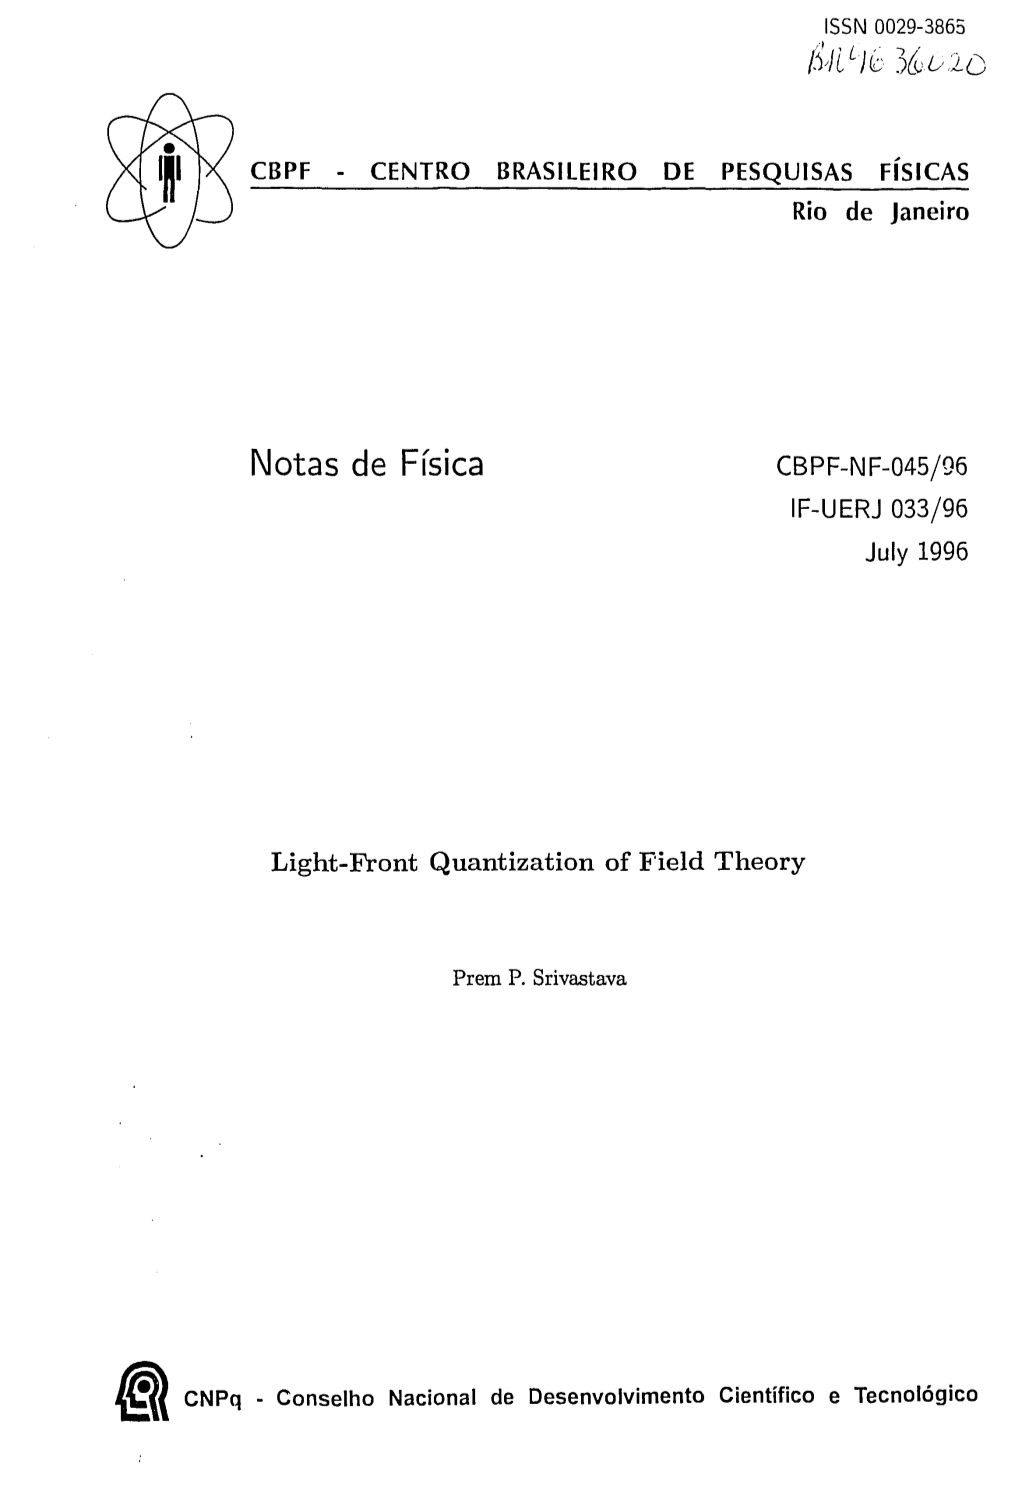 Light-Front Quantization of Field Theory